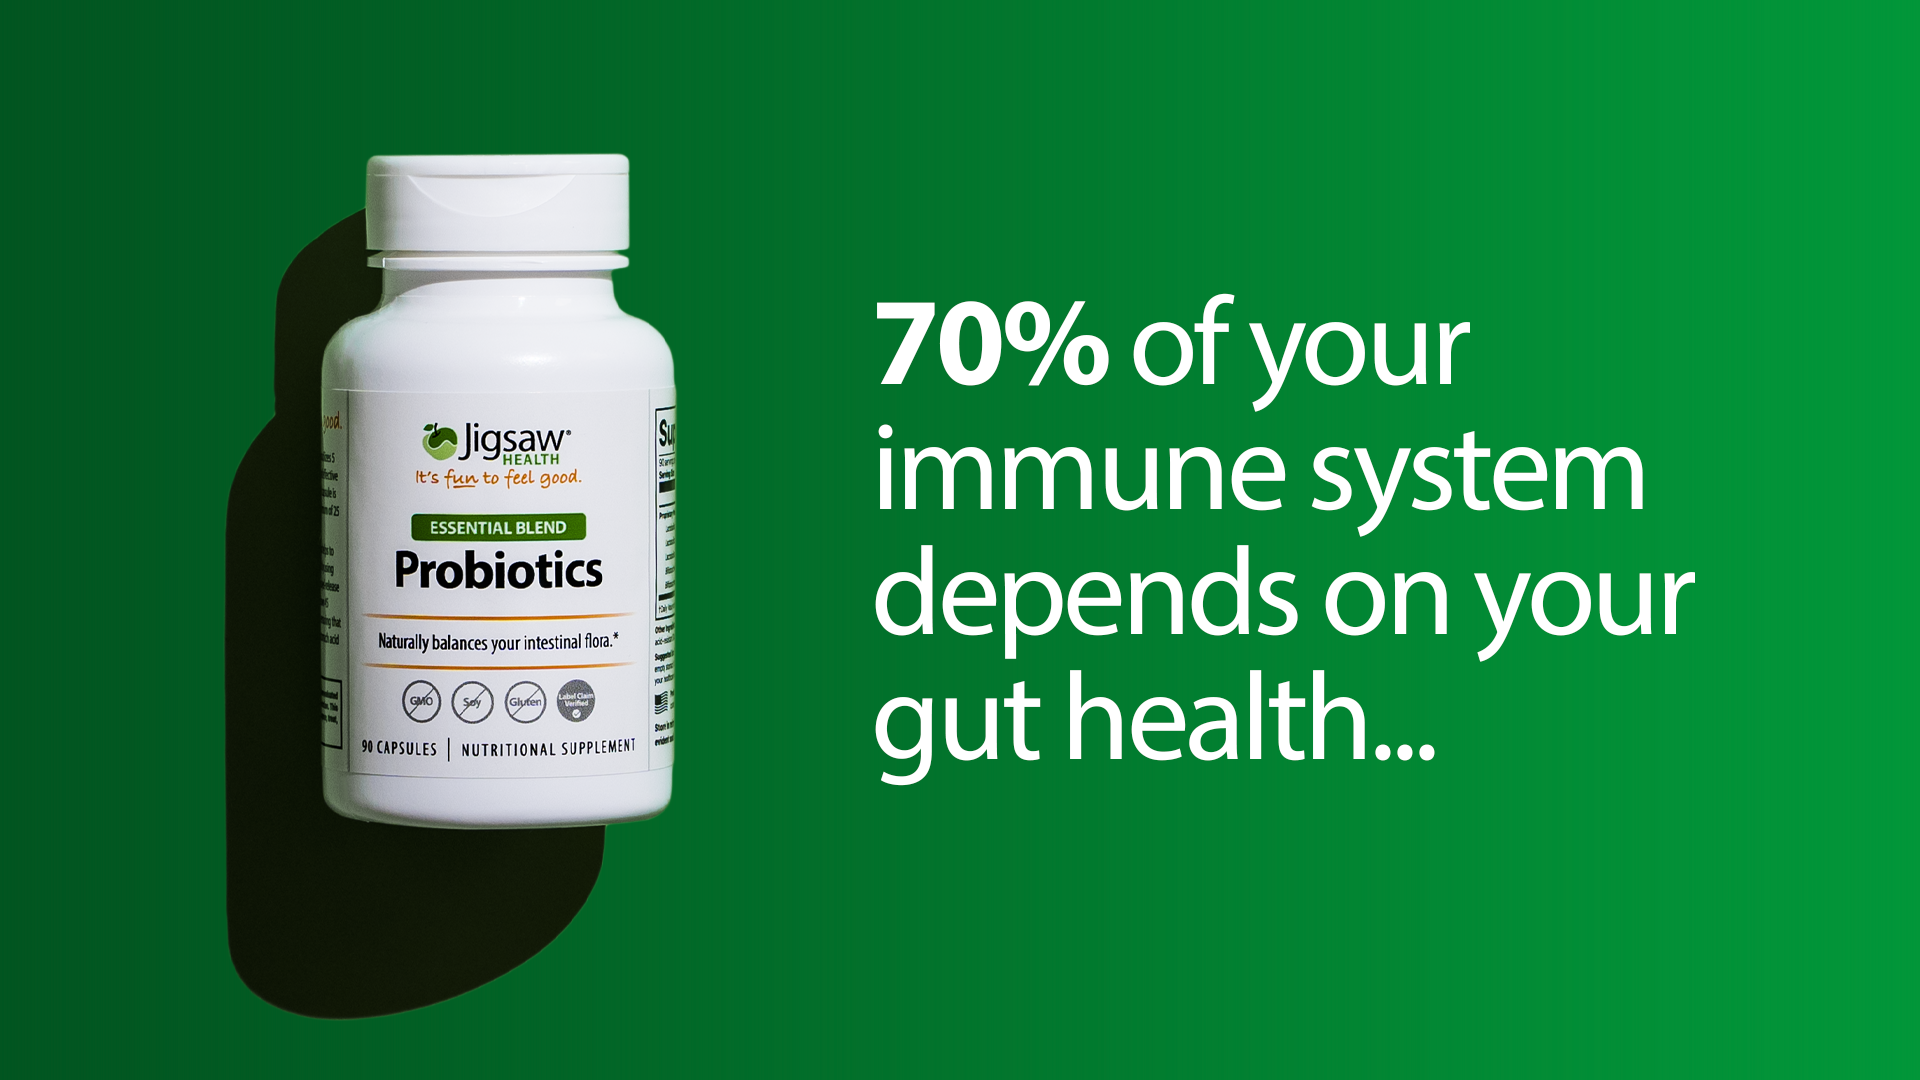 Feed your gut the "right stuff" so you can feel your best...